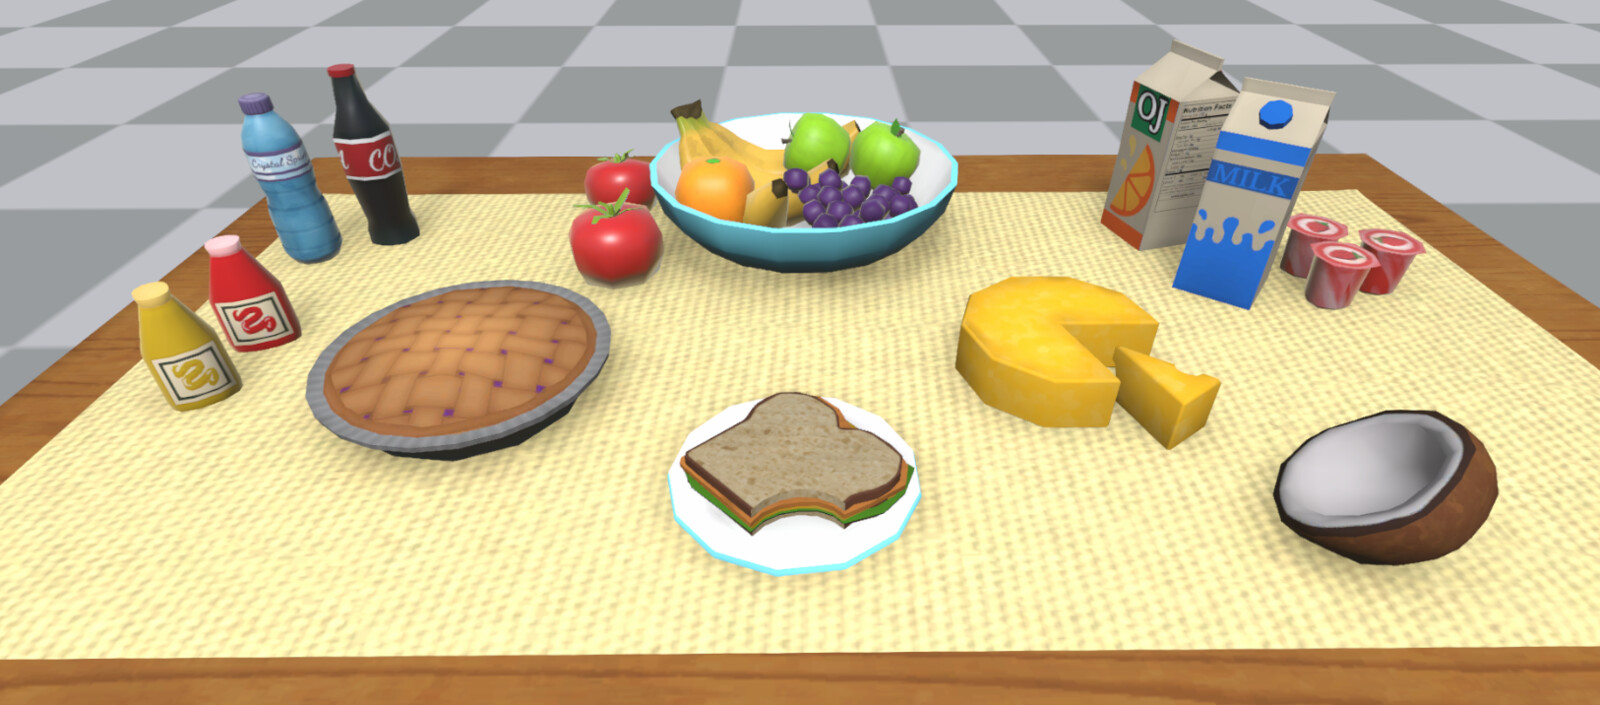 Food props made all sharing one 2k texture sheet.